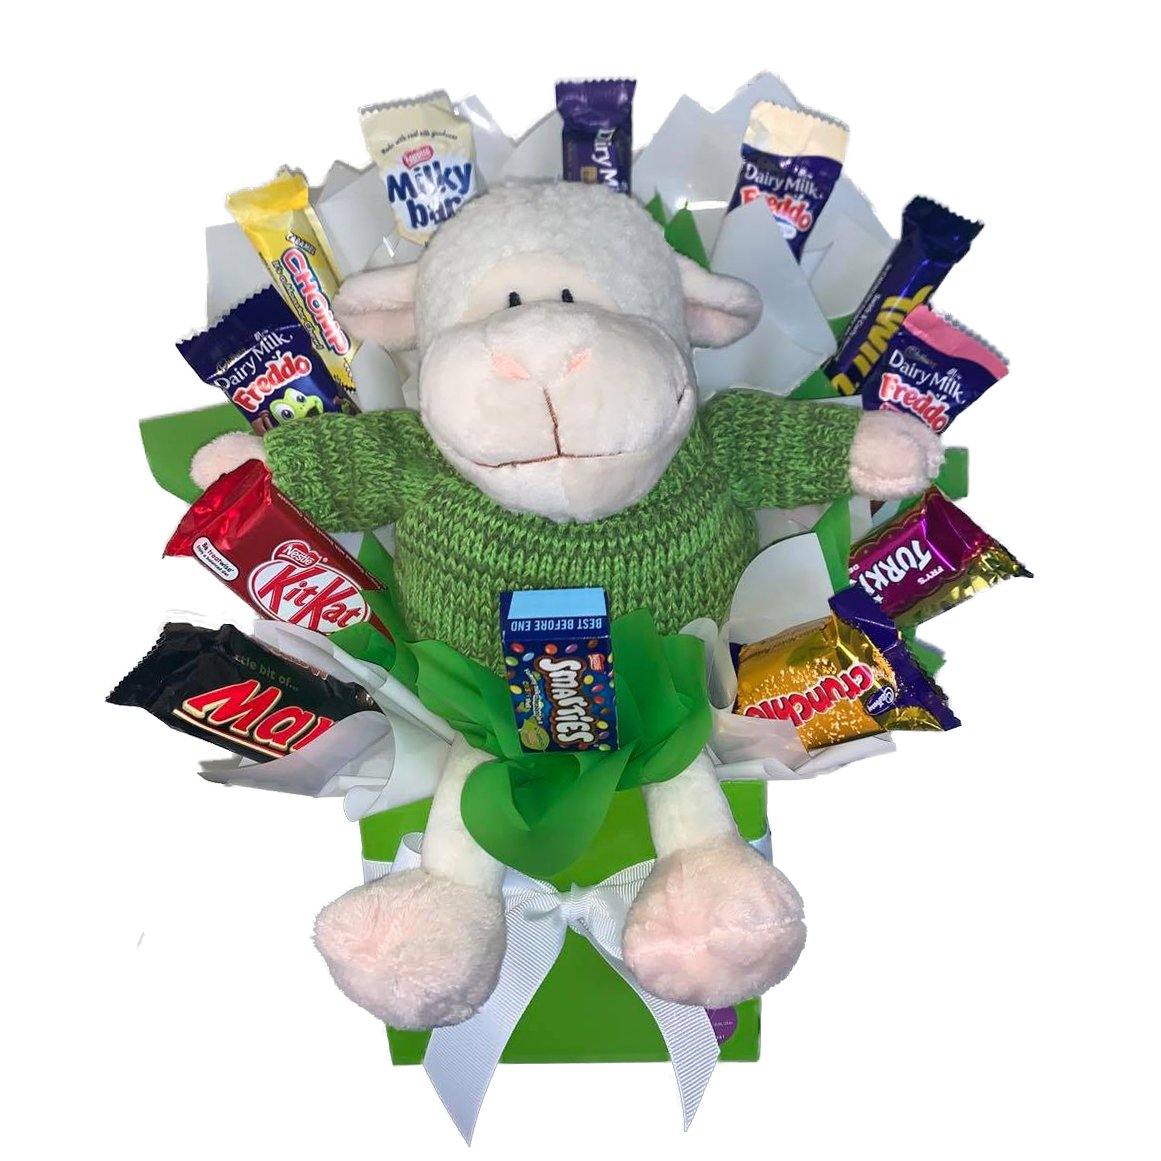 25cm Plush lamb wearing a green sweater surround by Nestle, Cadbury and Mars chocolates sitting in a posy box by Lollylicious